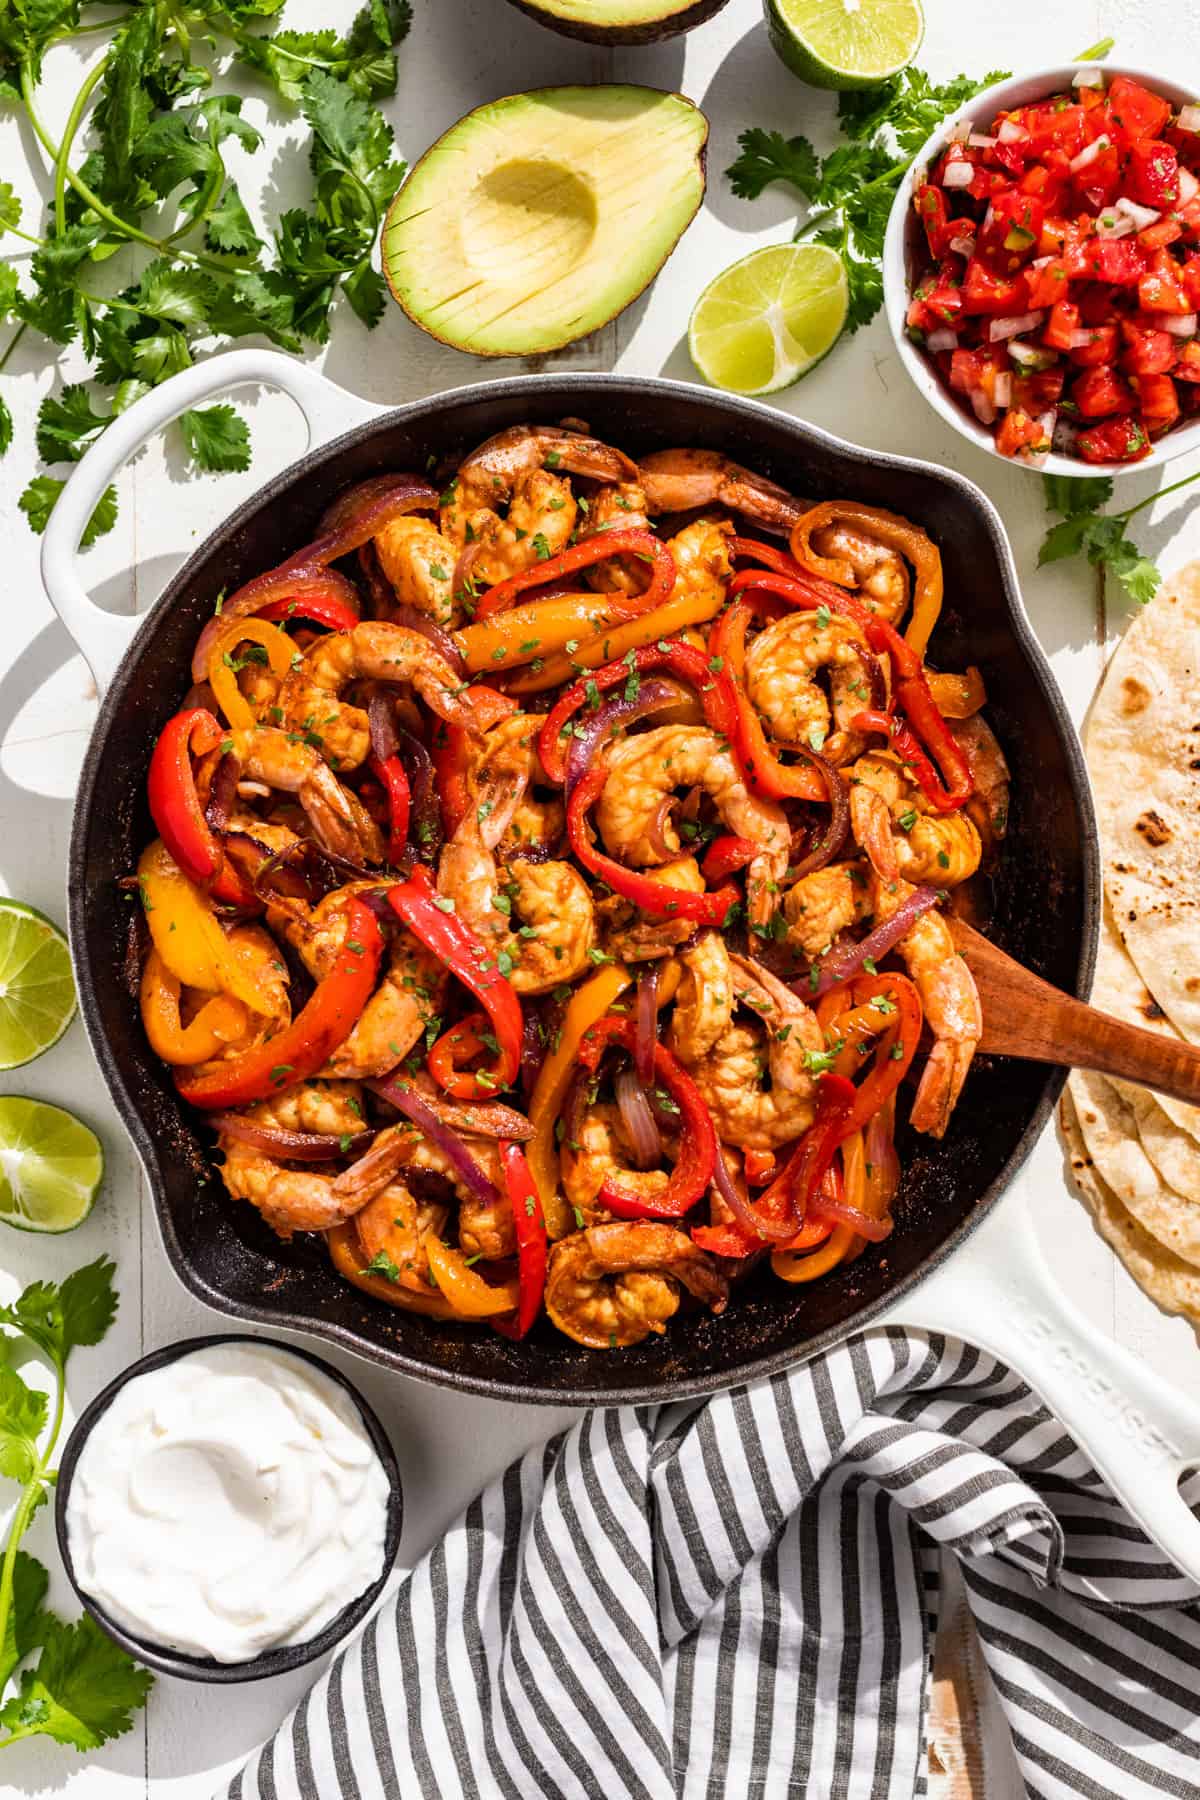 Shrimp Fajitas in a white skillet with sour cream, salsa, avocados, and cilantro on the side.